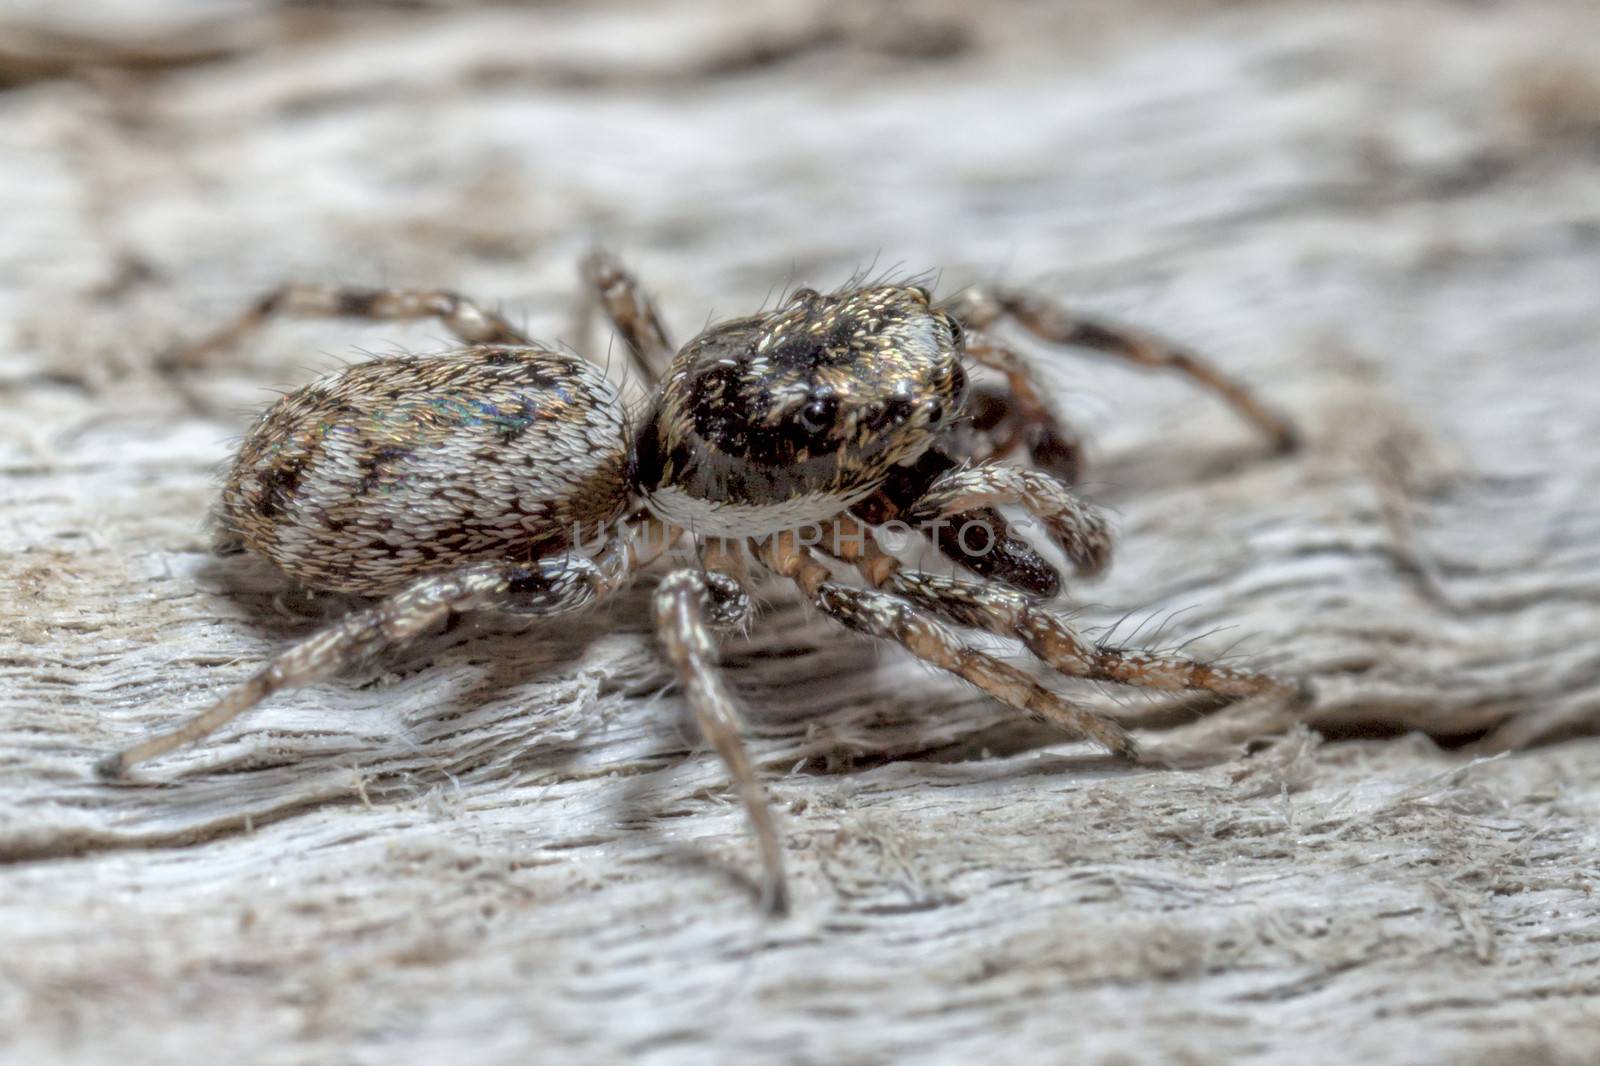 The jumping spider family (Salticidae) contains more than 500 described genera and about 5,000 described species, making it the largest family of spiders with about 13% of all species.  Jumping spiders have some of the best vision among invertebrates and use it in courtship, hunting, and navigation.